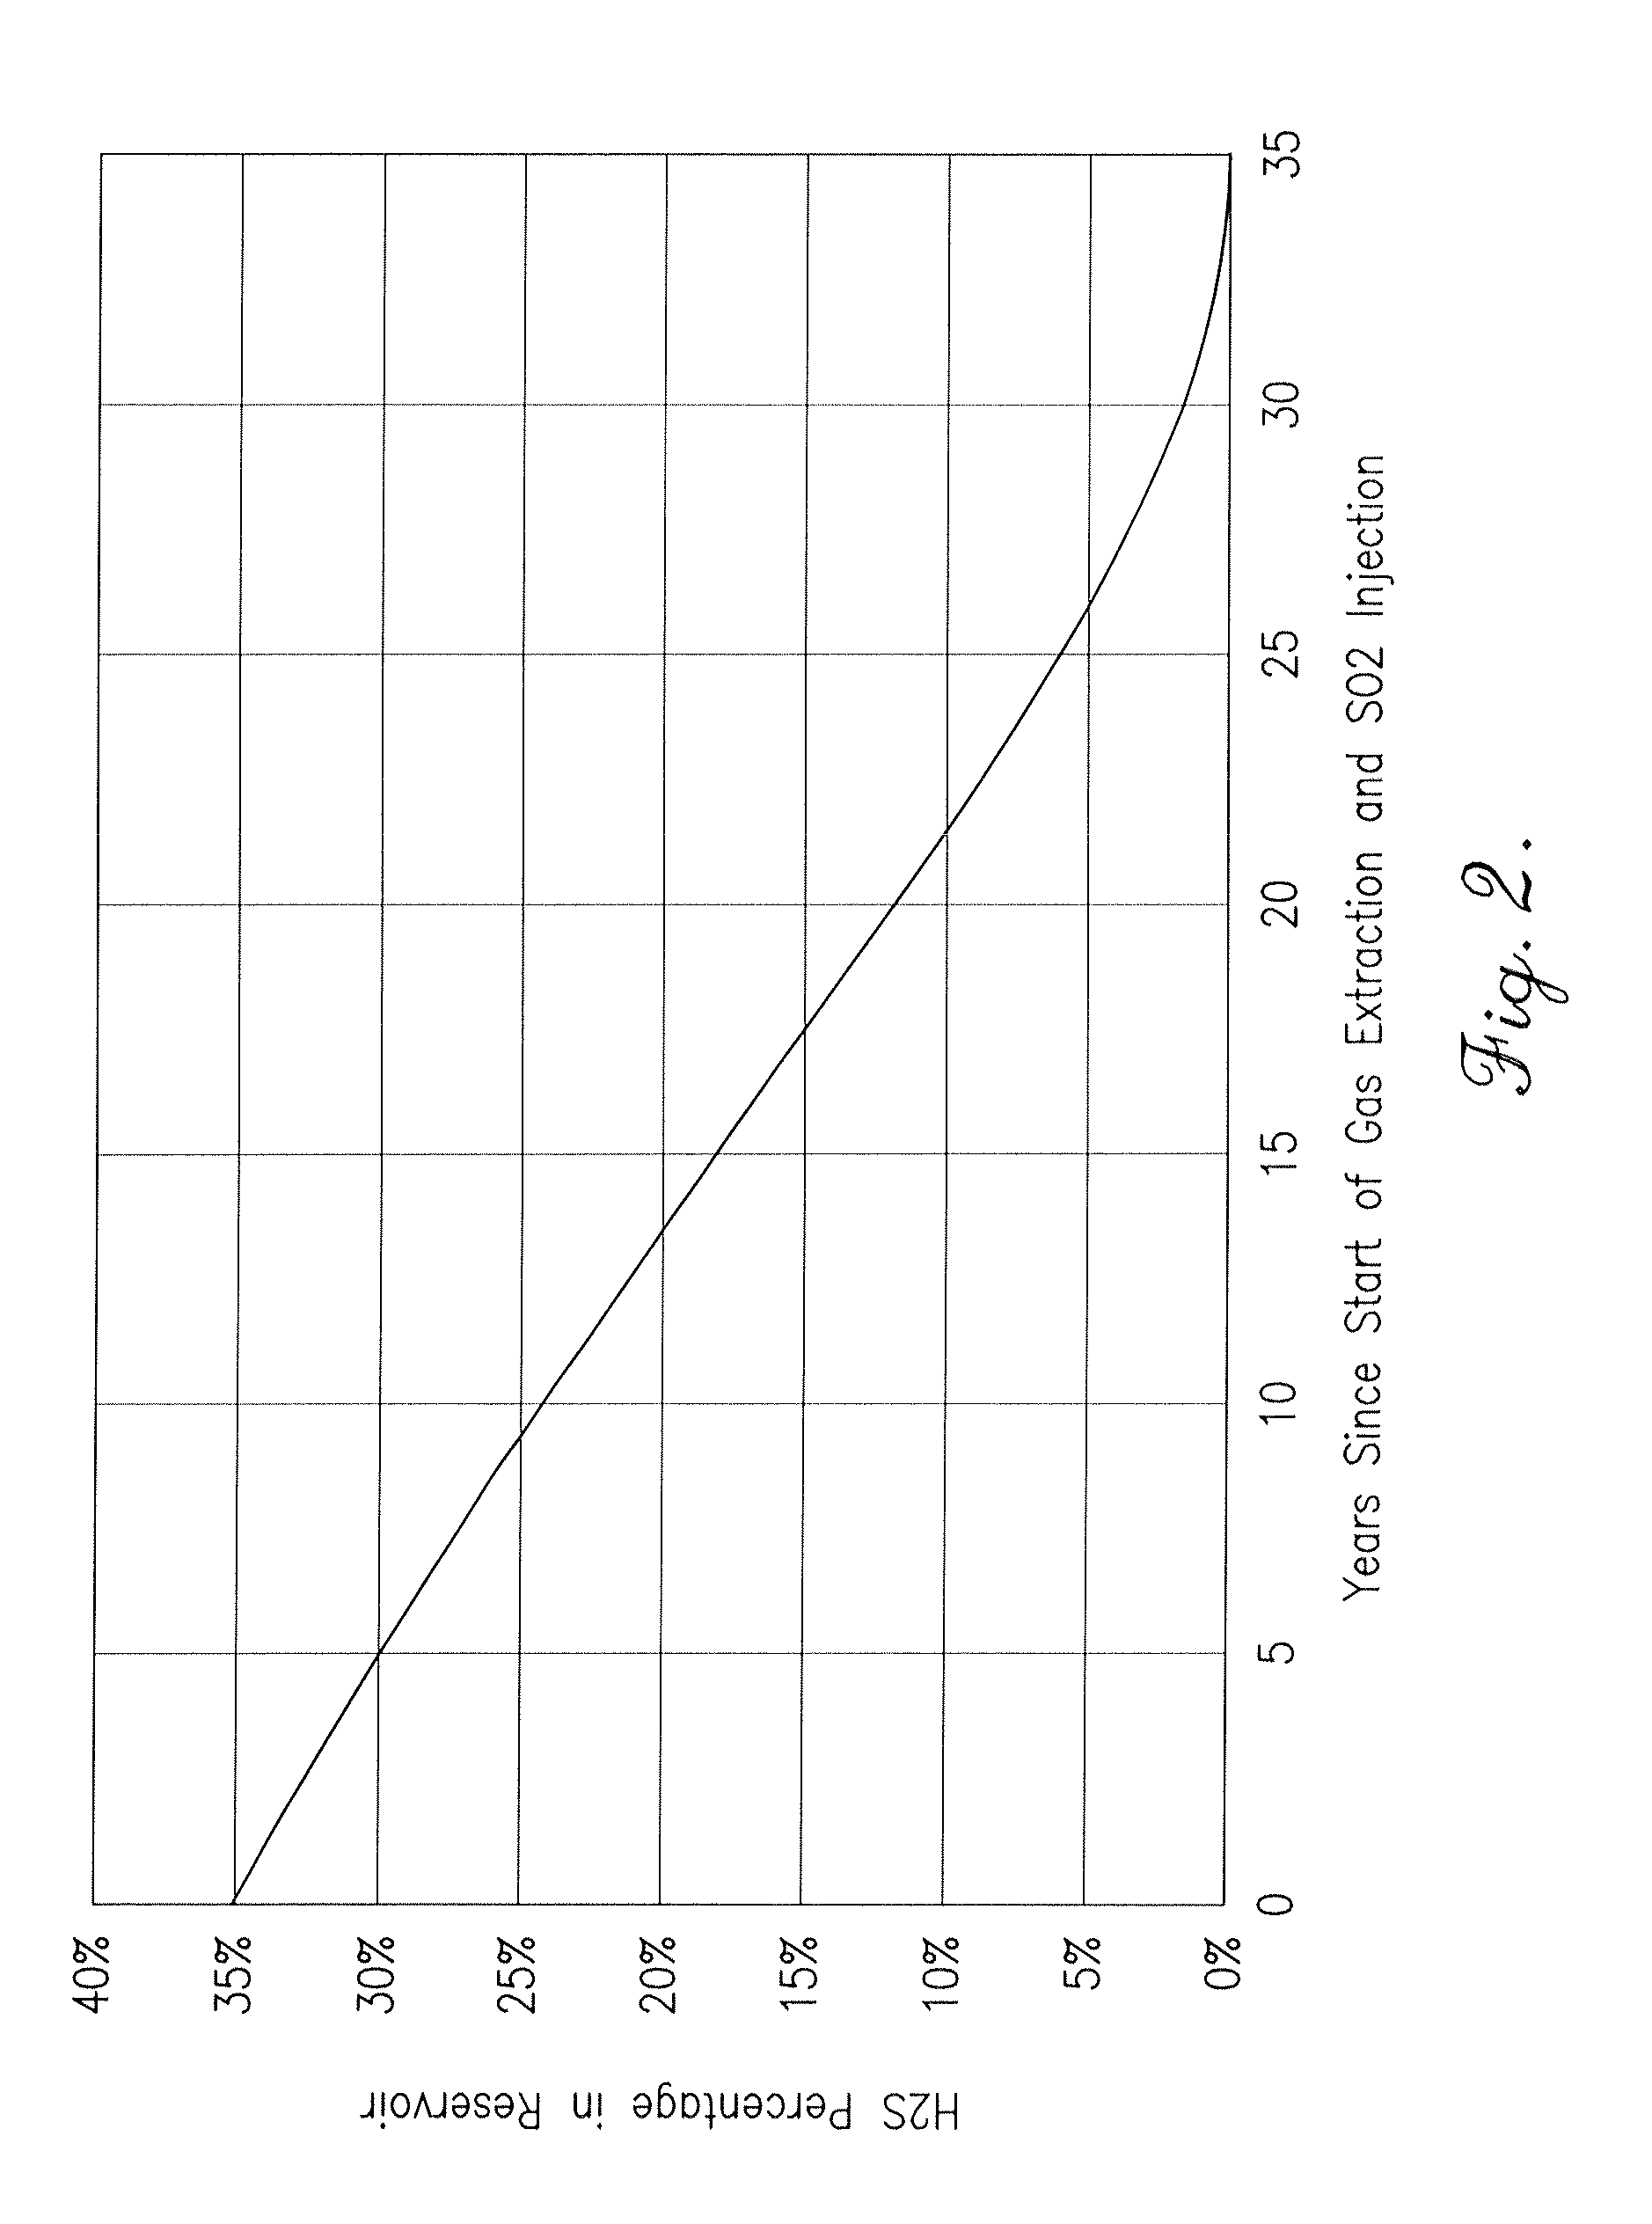 Method for reducing the H2S content of an H2S-containing subterranean formation